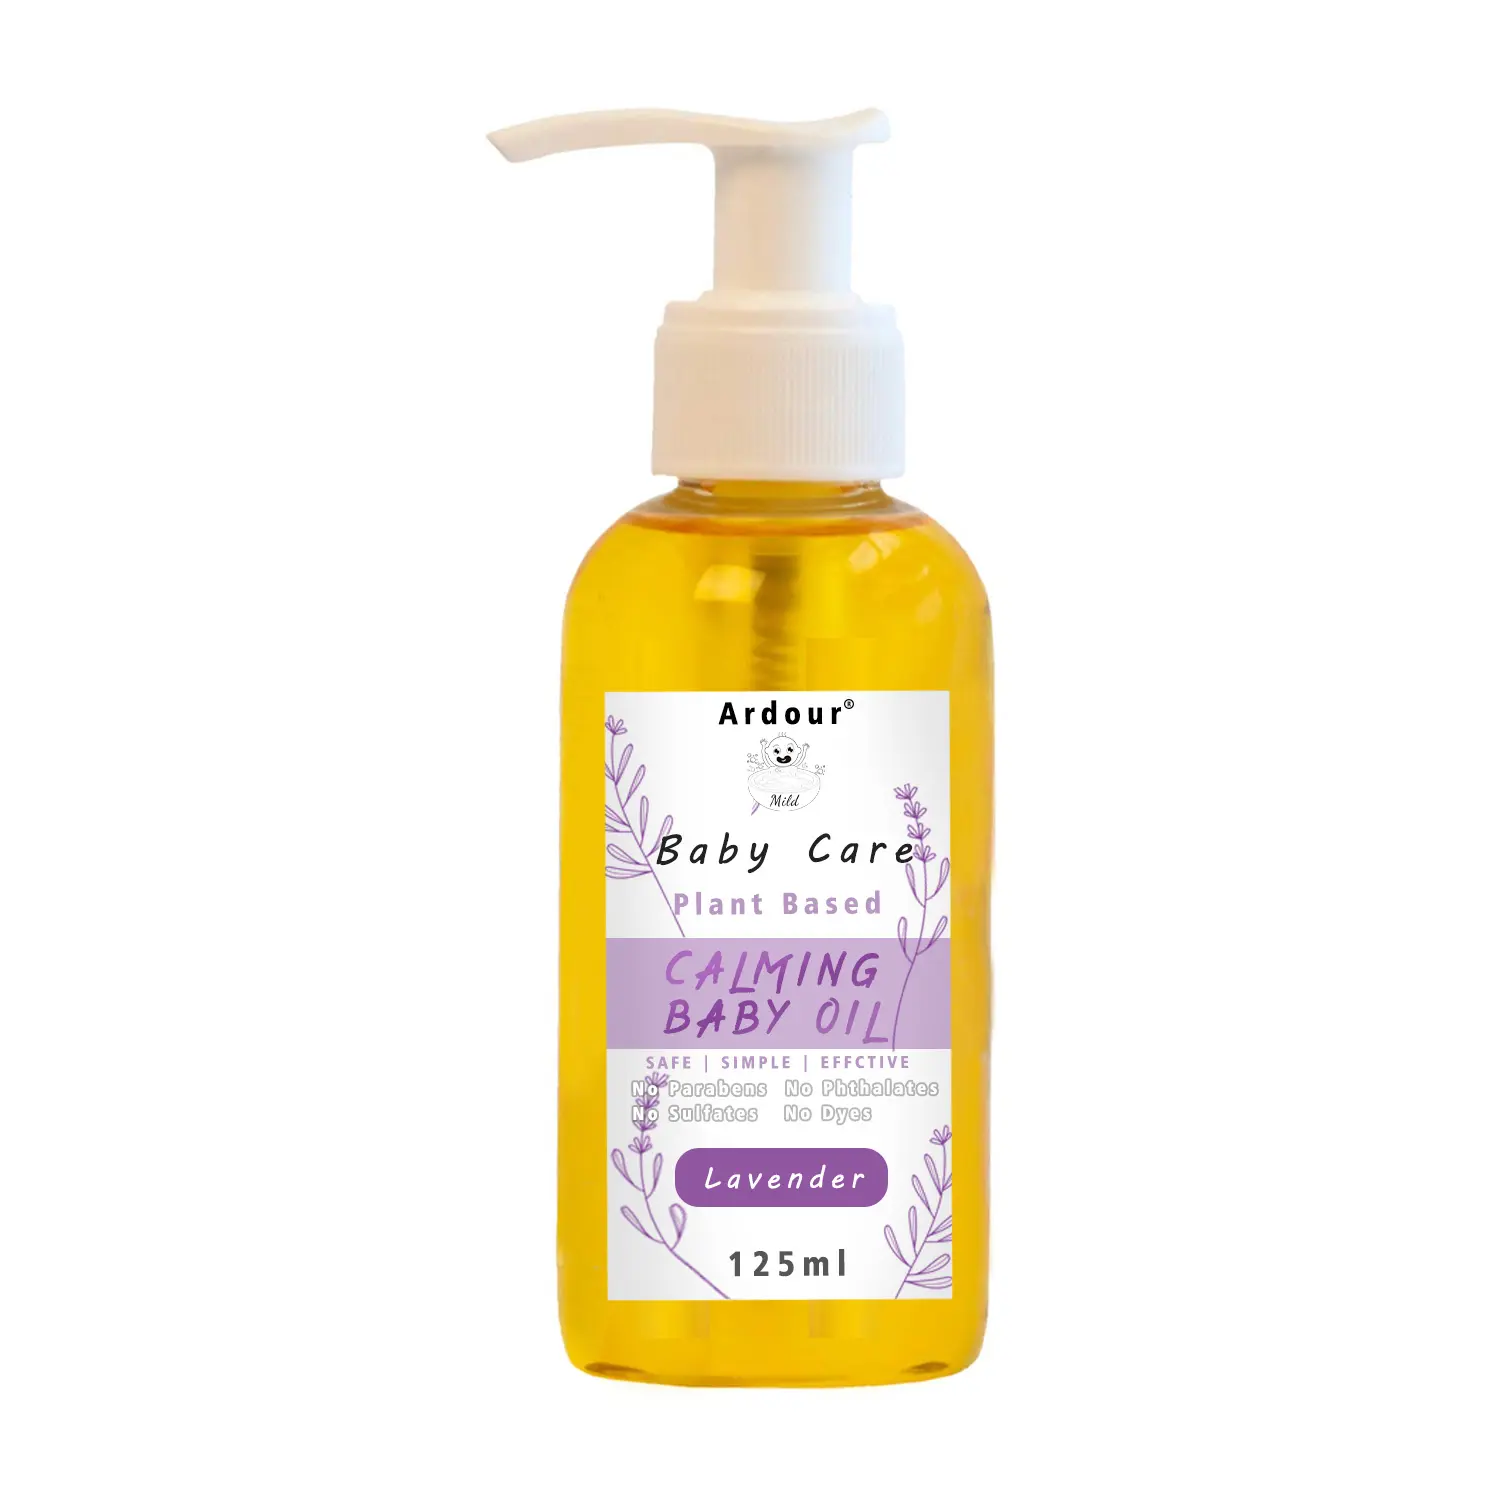 Lavender Natural Organic Baby Care Products Baby Oil For Newborn Skin Hair and Body Moisturizing Nourishing Smoothing